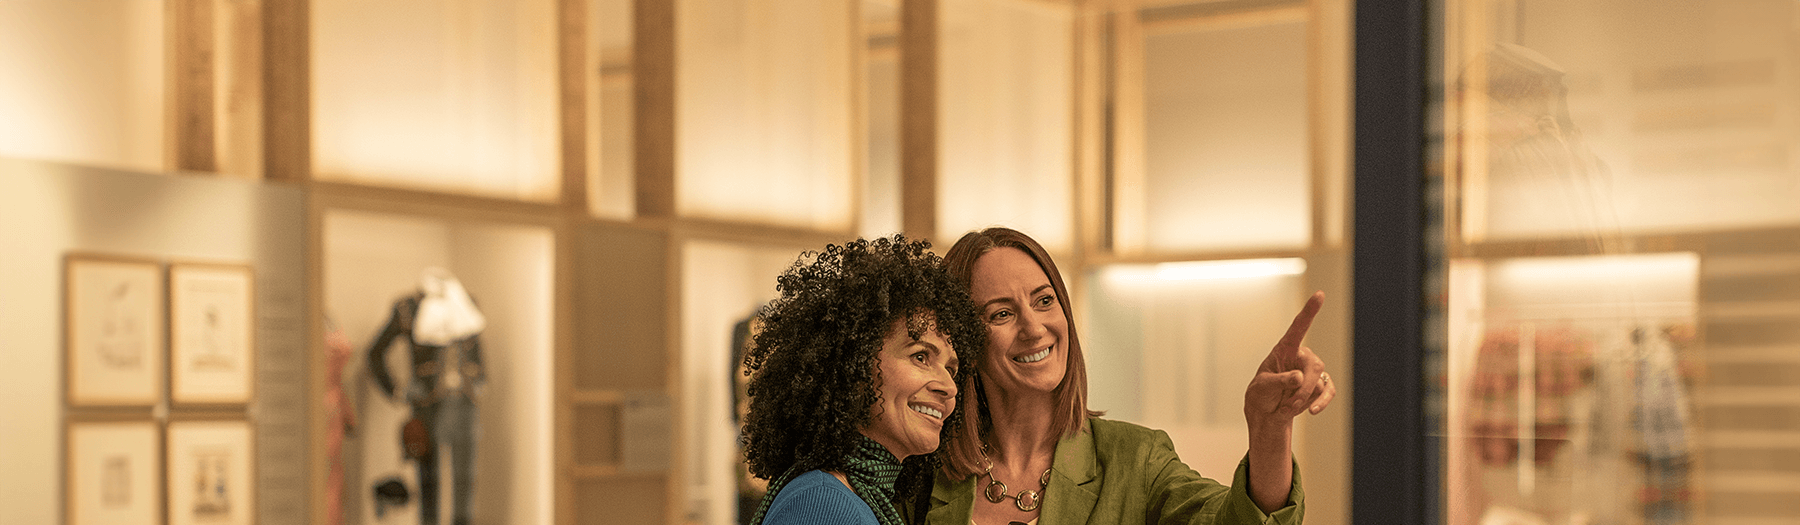 Two females smiling inside the V&A museum in Dundee